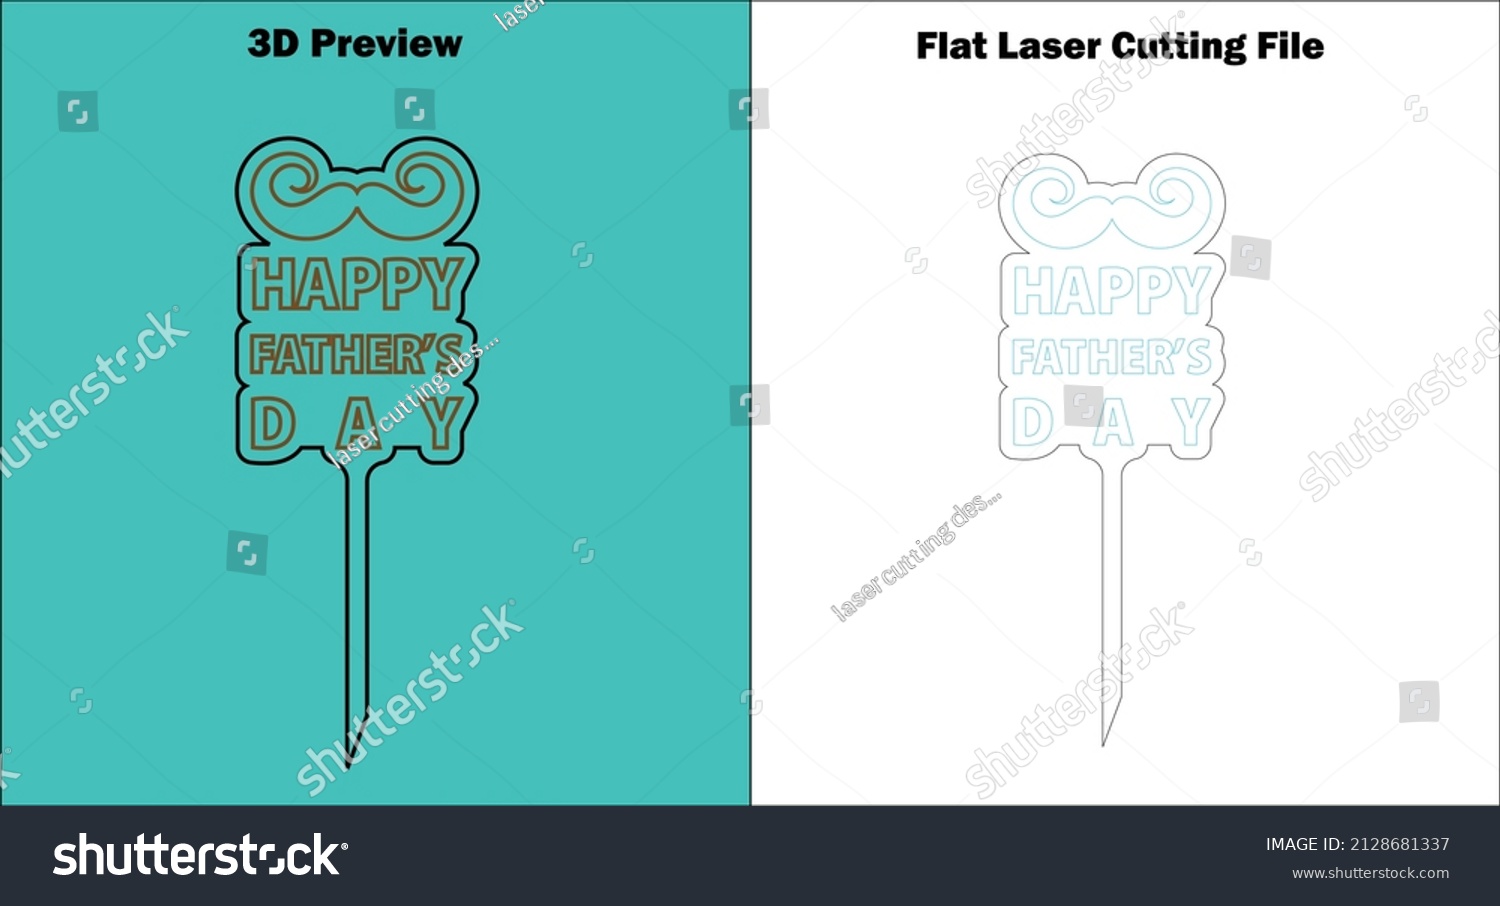 SVG of Cake Topper
This is a lovely cake topper that is available for all material thicknesses. svg